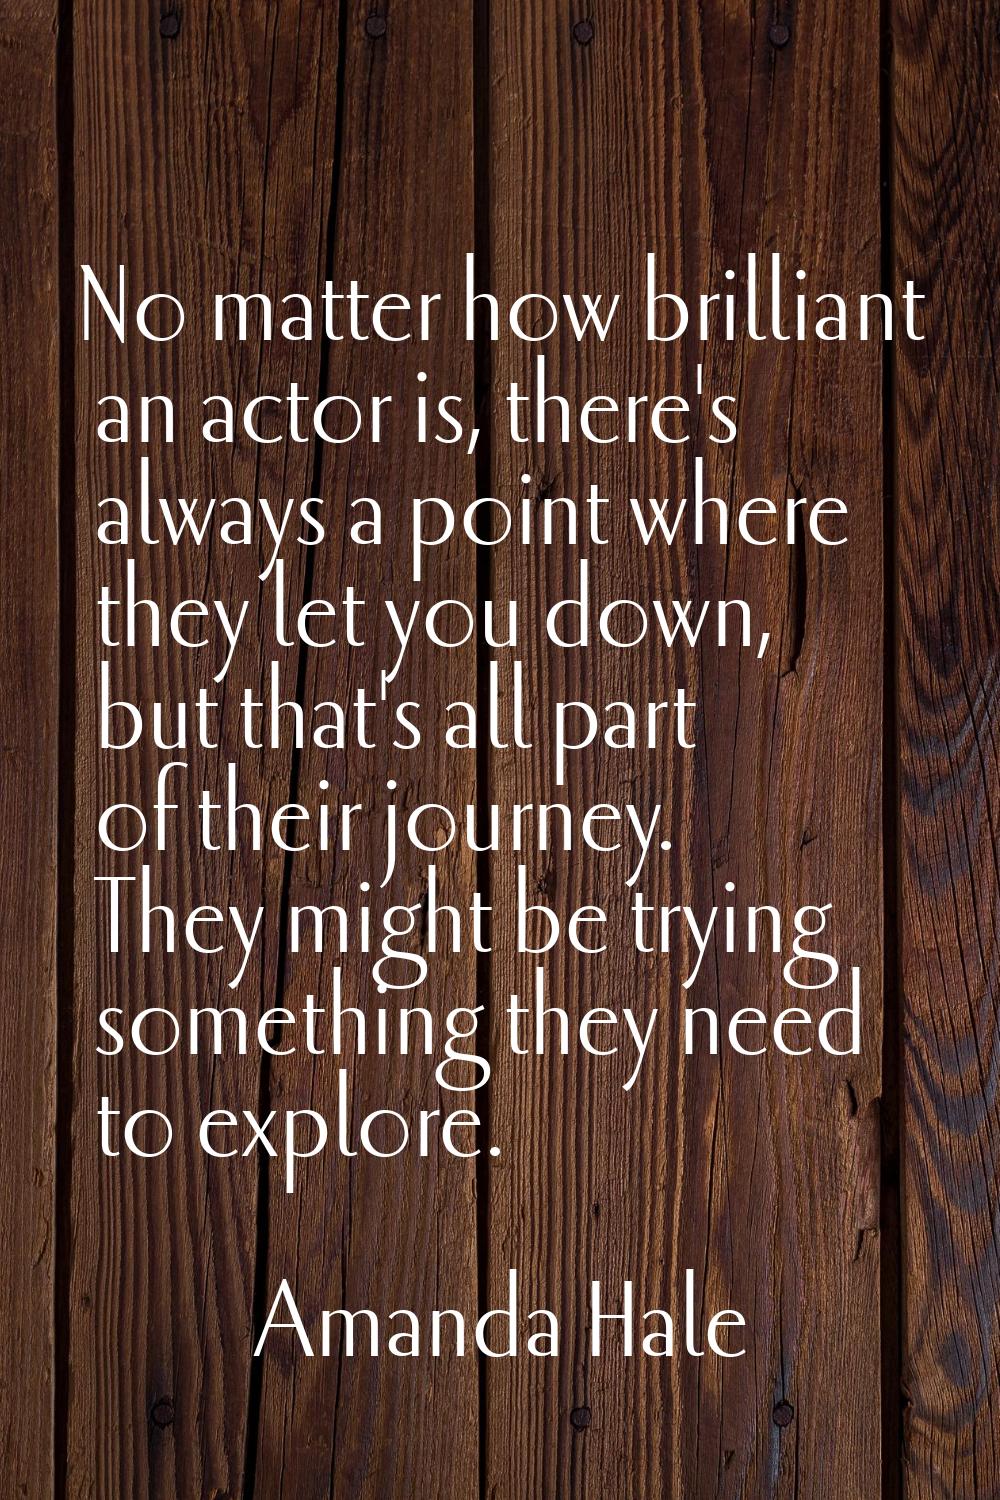 No matter how brilliant an actor is, there's always a point where they let you down, but that's all